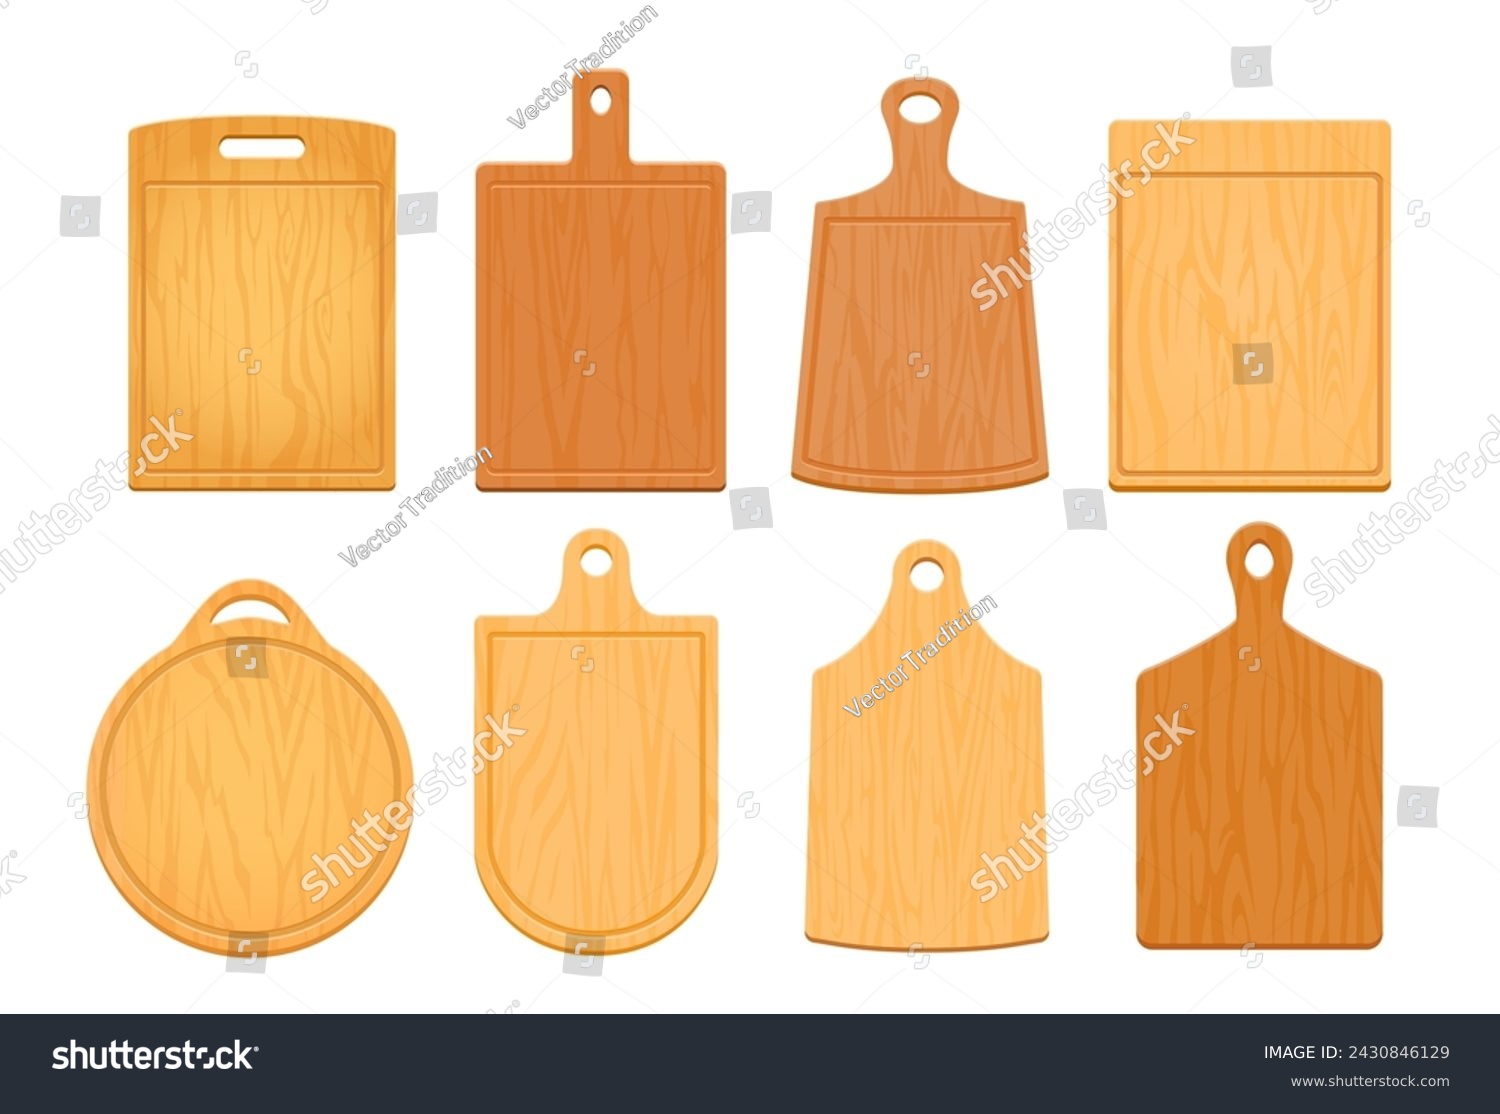 SVG of Cartoon wooden chopping boards or kitchen cutting plates of wood, vector set. Food chopping boards, circle for pizza, round and square chopping plates for table or cooking with holes in handles svg